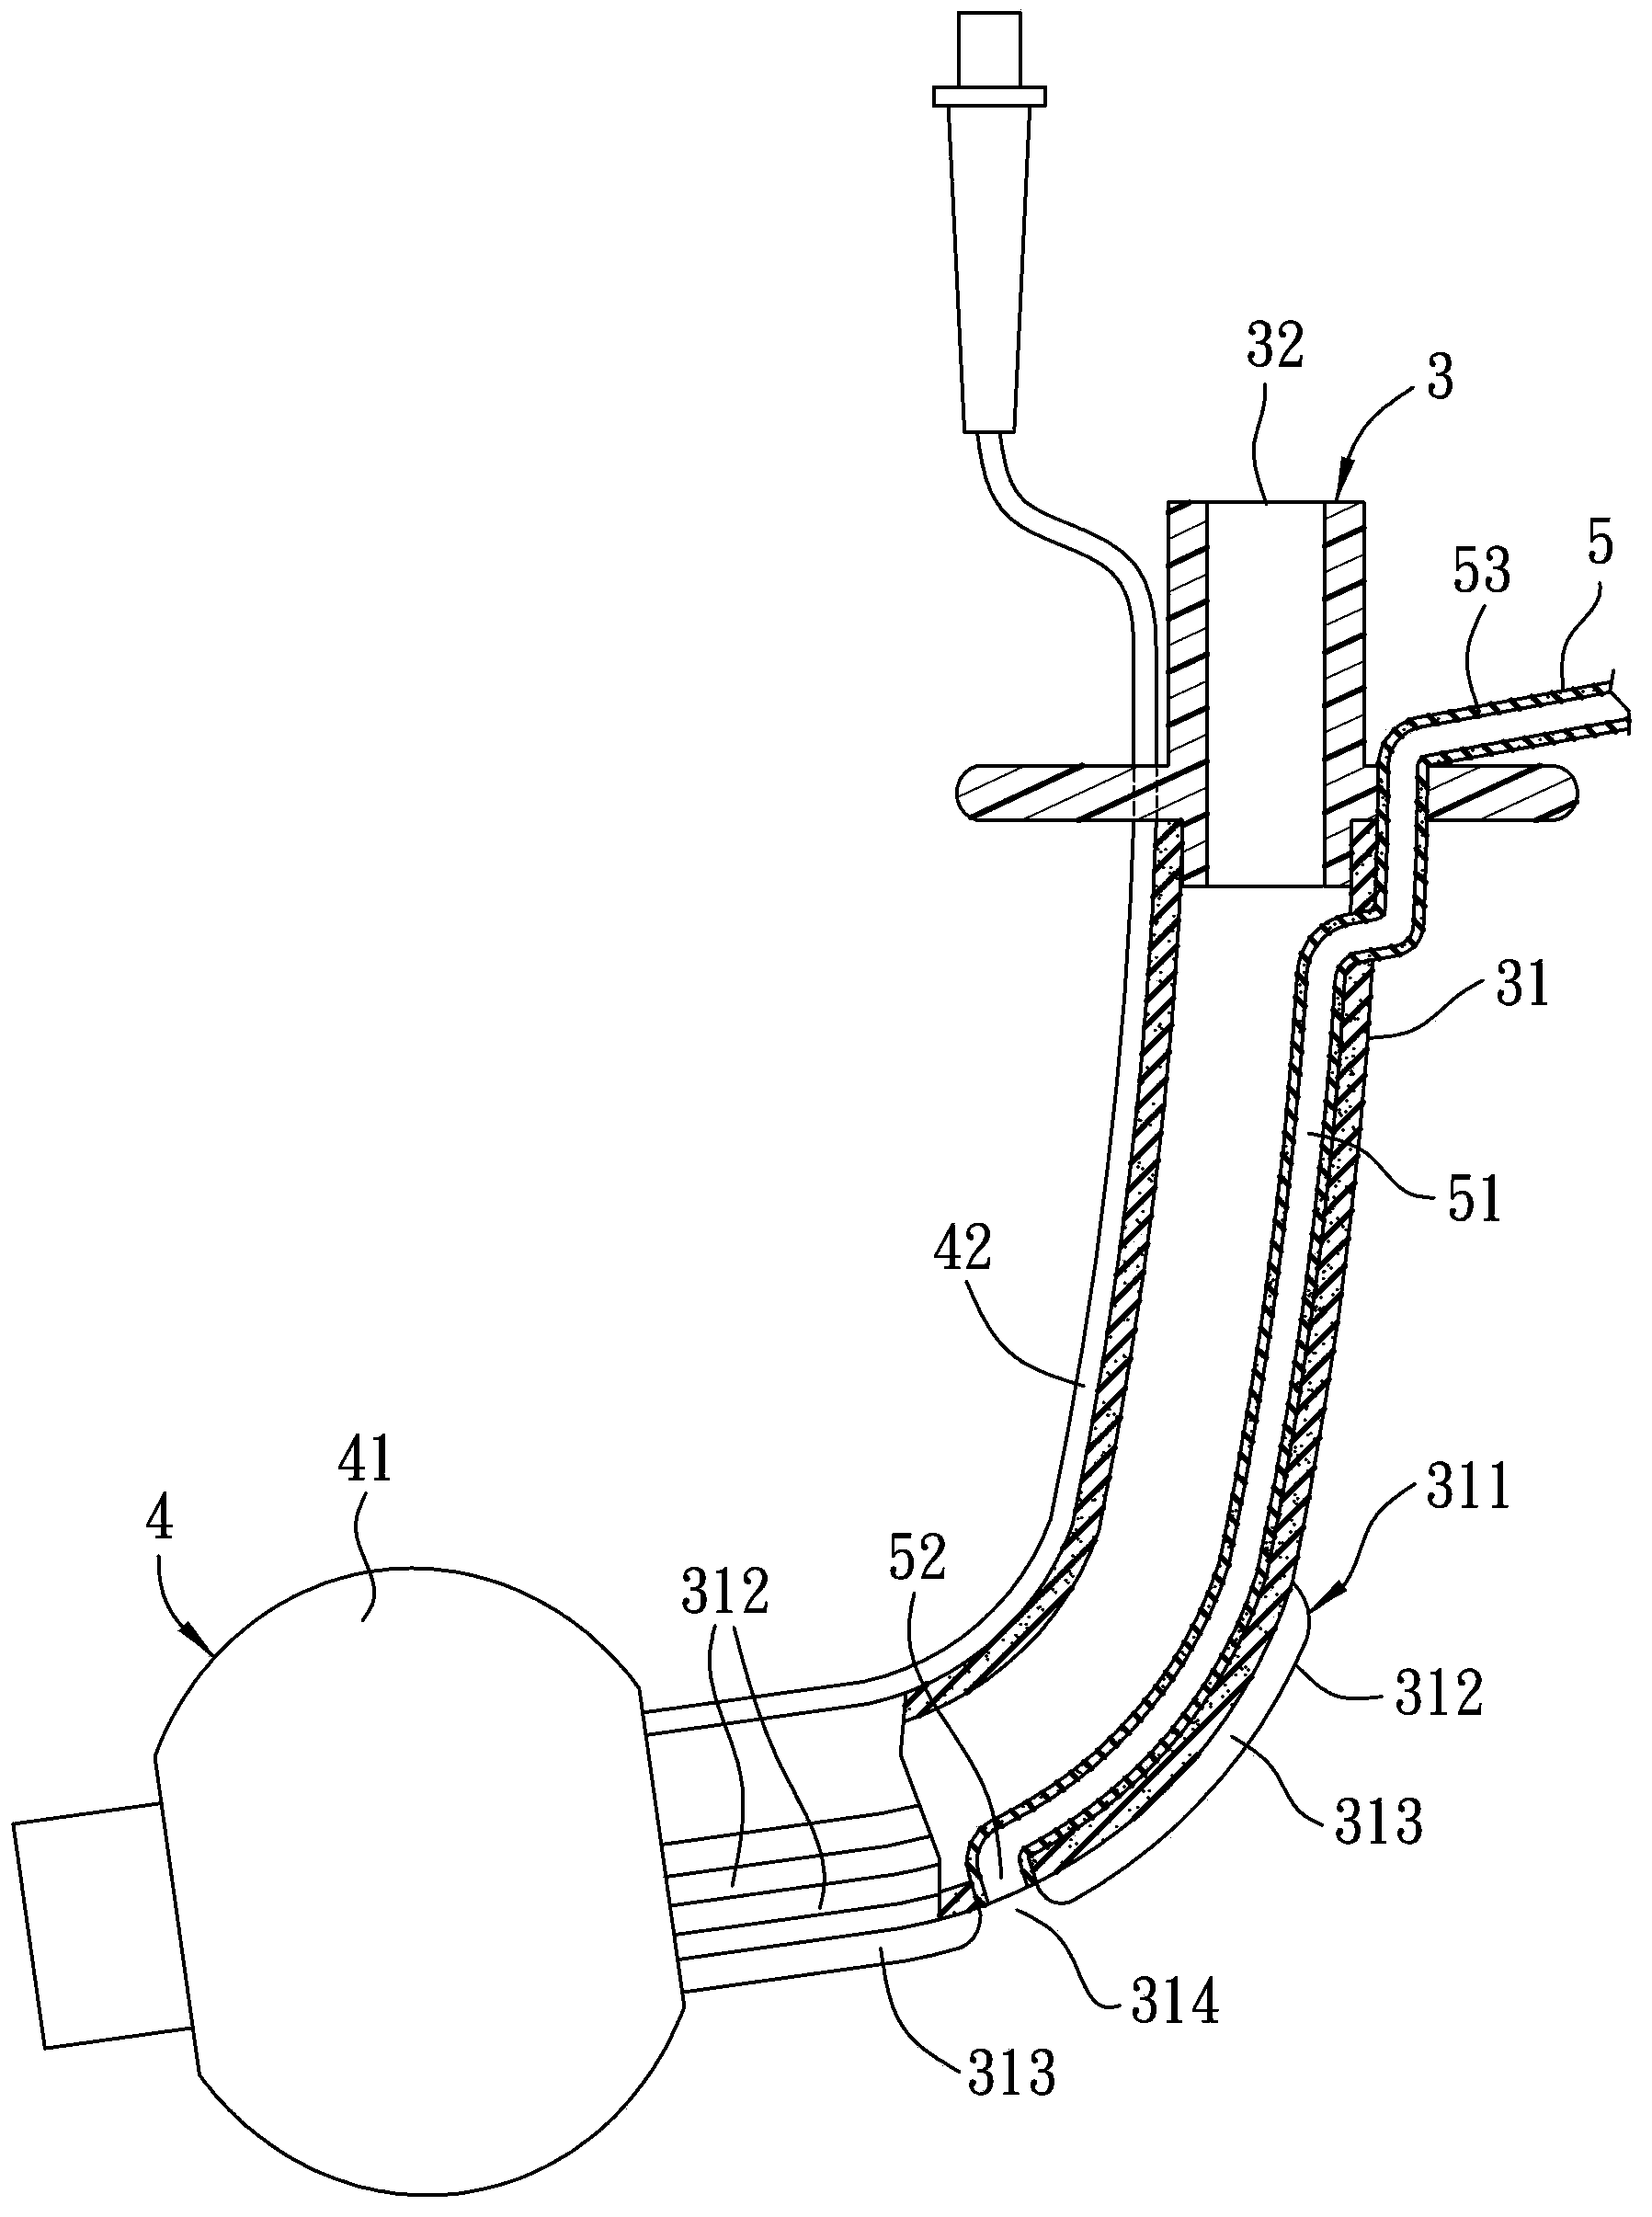 Tracheal tube for secretion removal